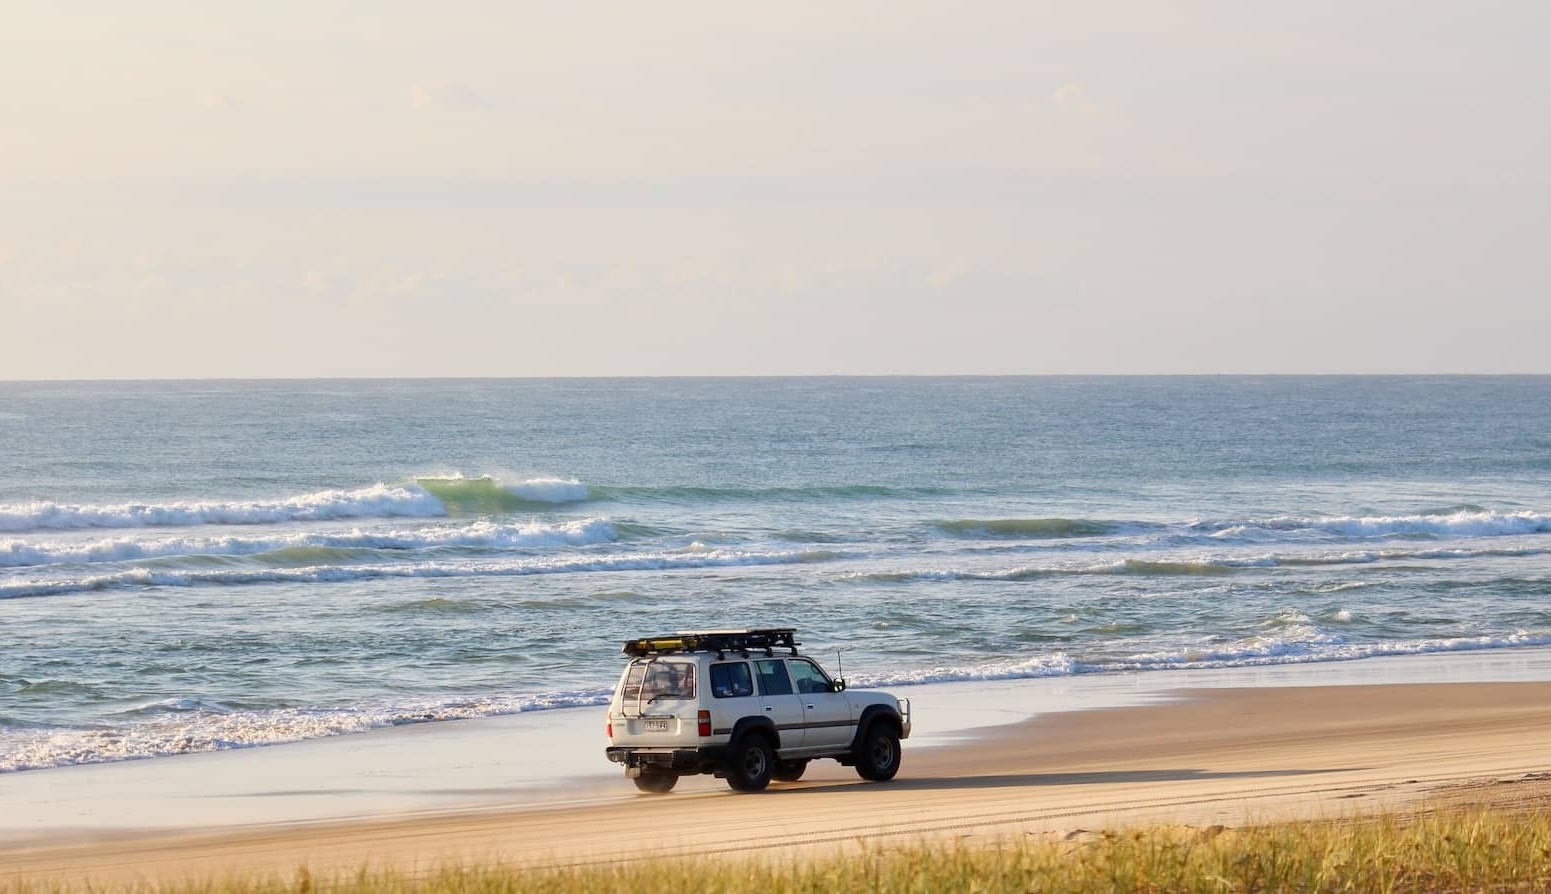 Fraser Island Tour, You’ll Love This Unique 4WD Adventure